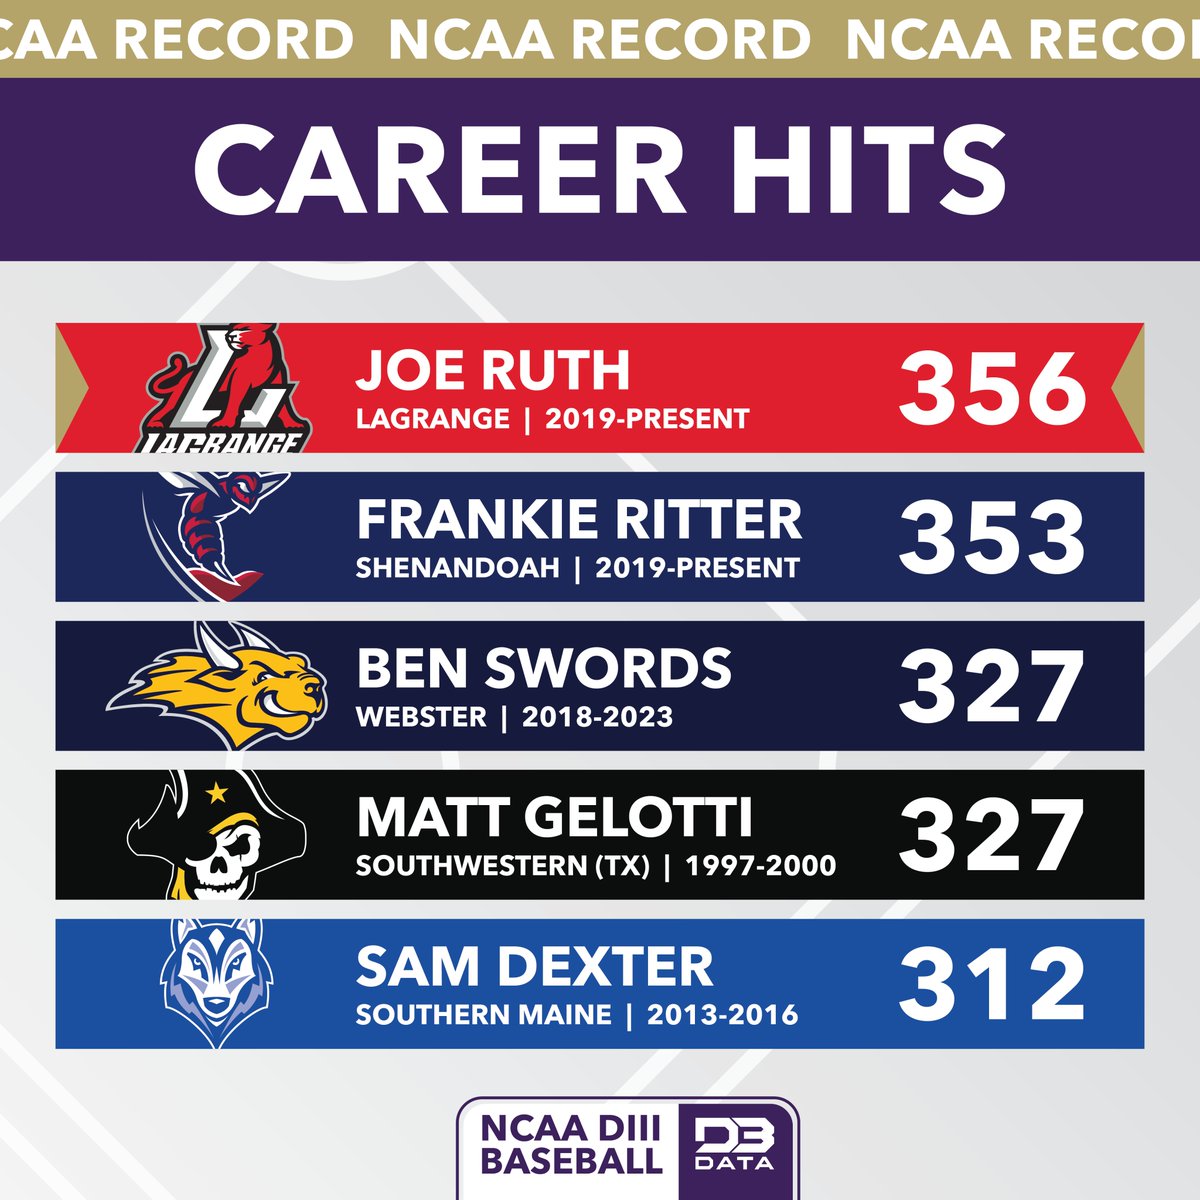 It was a race all throughout the season but we now have a new NCAA record in hits for a career. Joe Ruth of LaGrange finishes his career with 356 hits, shattering the old record, with Frankie Ritter of Shenandoah hot on his heels at 353. #d3data #d3 #d3sports #d3baseball